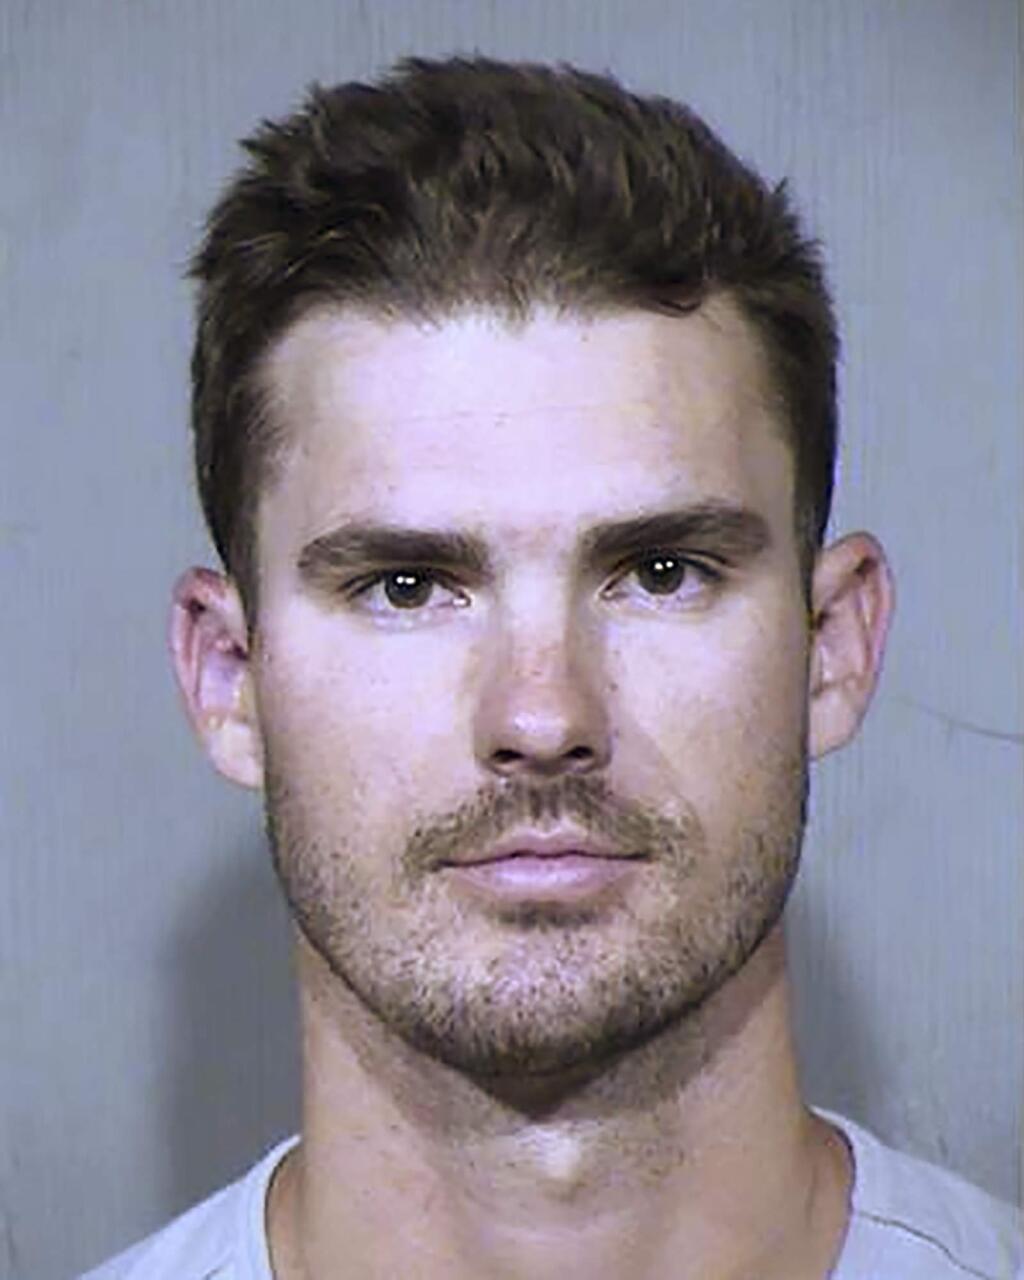 This Oct. 6, 2019, booking photo provided by the Maricopa County Sheriff's Office in Phoenix shows San Diego Padres pitcher Jacob Nix. Police say Nix was arrested for trying to crawl through the doggie door of a home in the Phoenix suburb of Peoria, Ariz. (Maricopa County Sheriff's Office via AP)